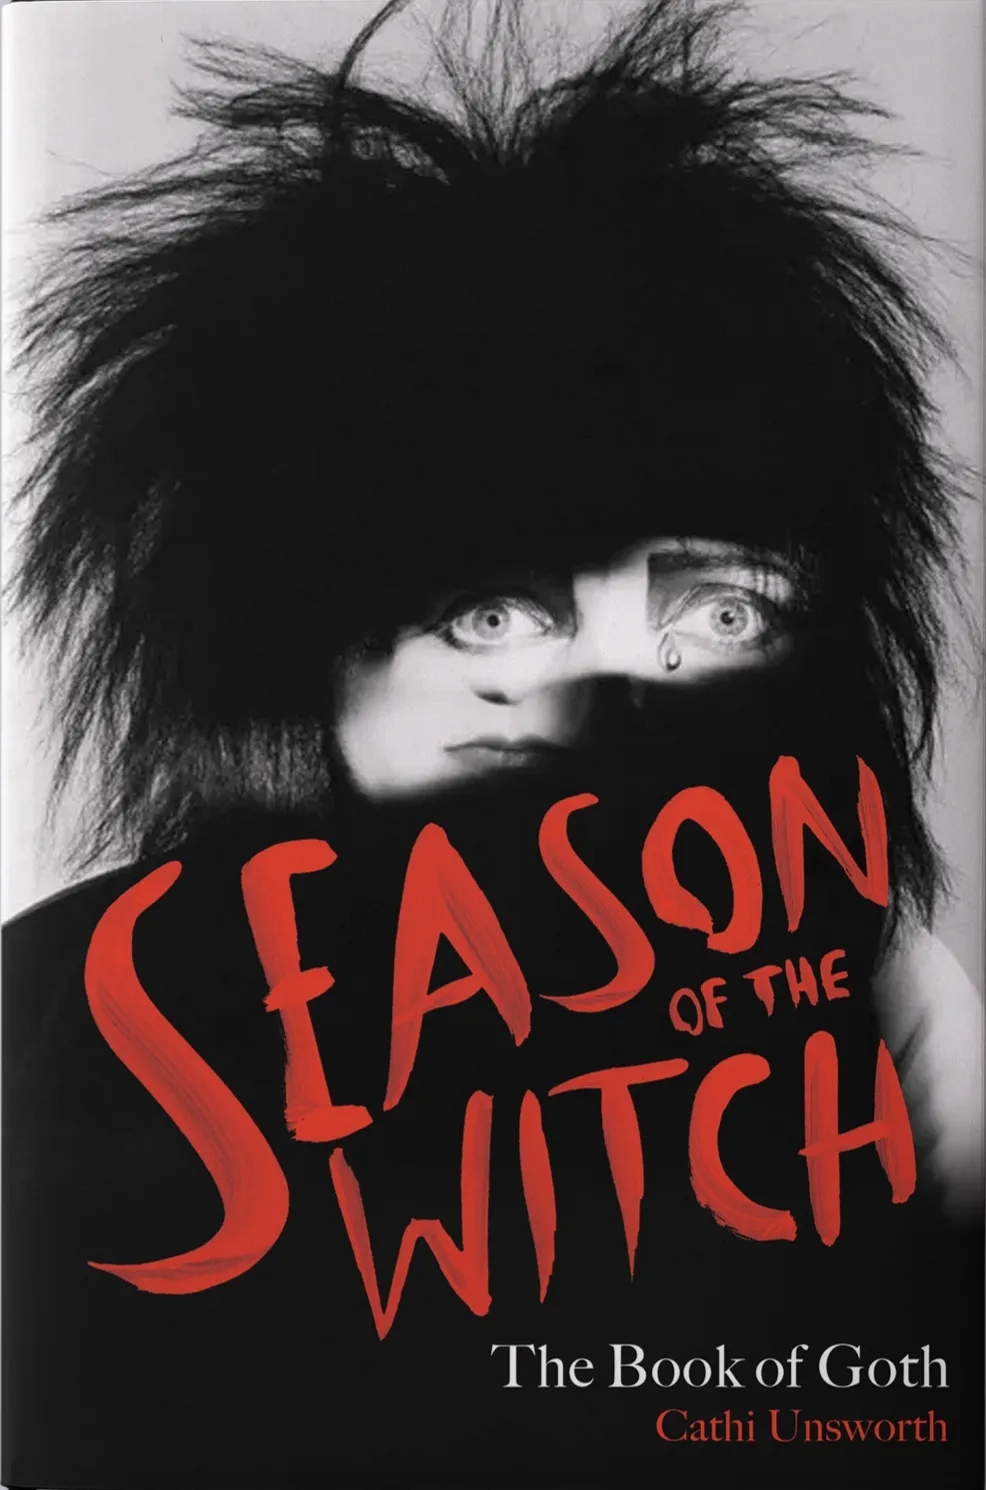 Album artwork for Season of the Witch: The Book of Goth by Cathi Unsworth